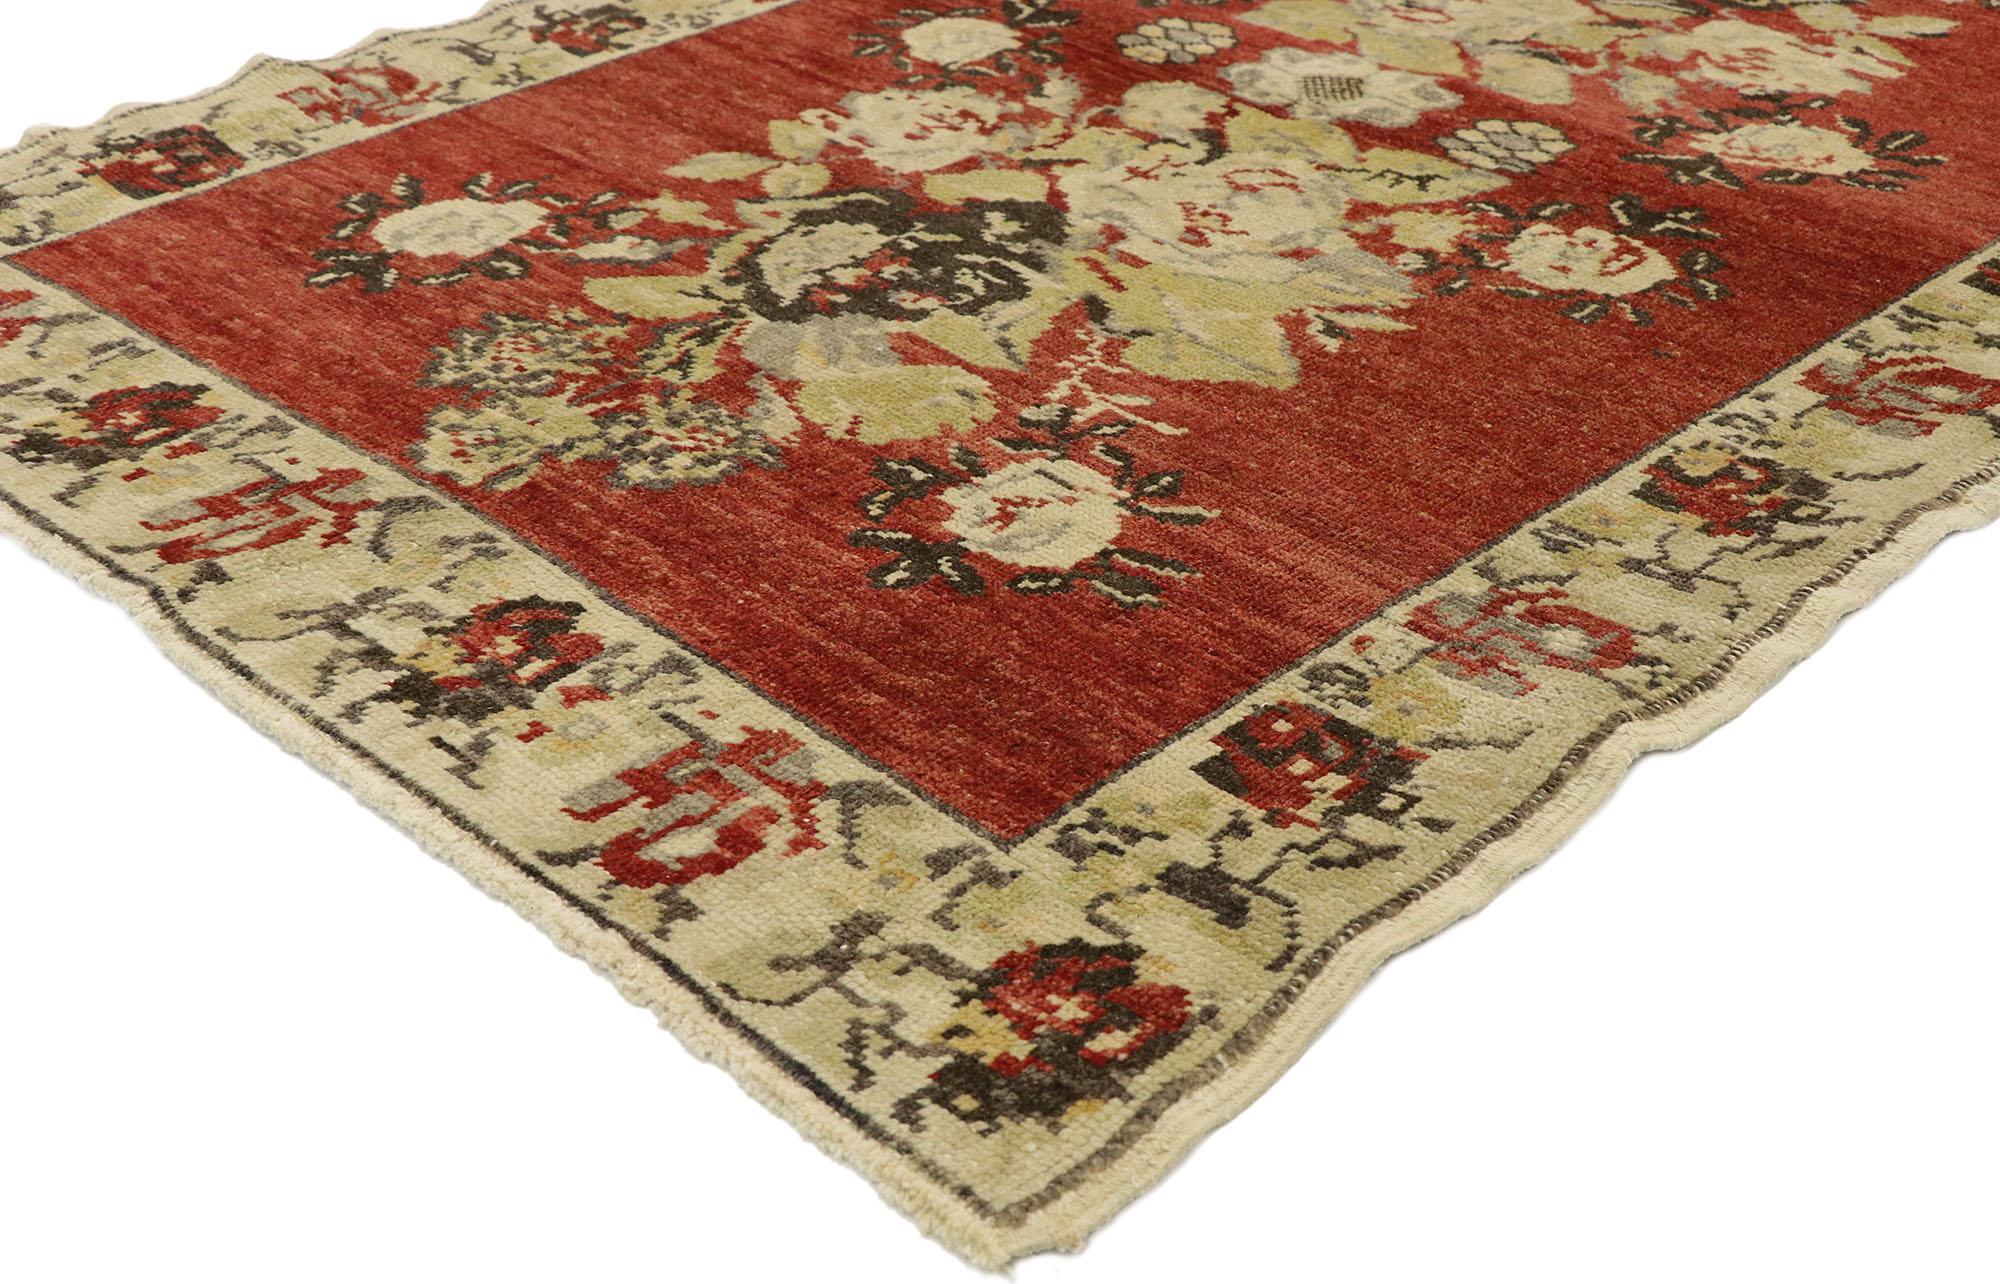 ?52978, vintage Turkish Oushak rug with rustic English Tudor Manor House style. ?Warm and inviting combined with romantic connotations, this hand knotted wool vintage Turkish Oushak rug beautifully embodies a rustic English Tudor Manor House style.